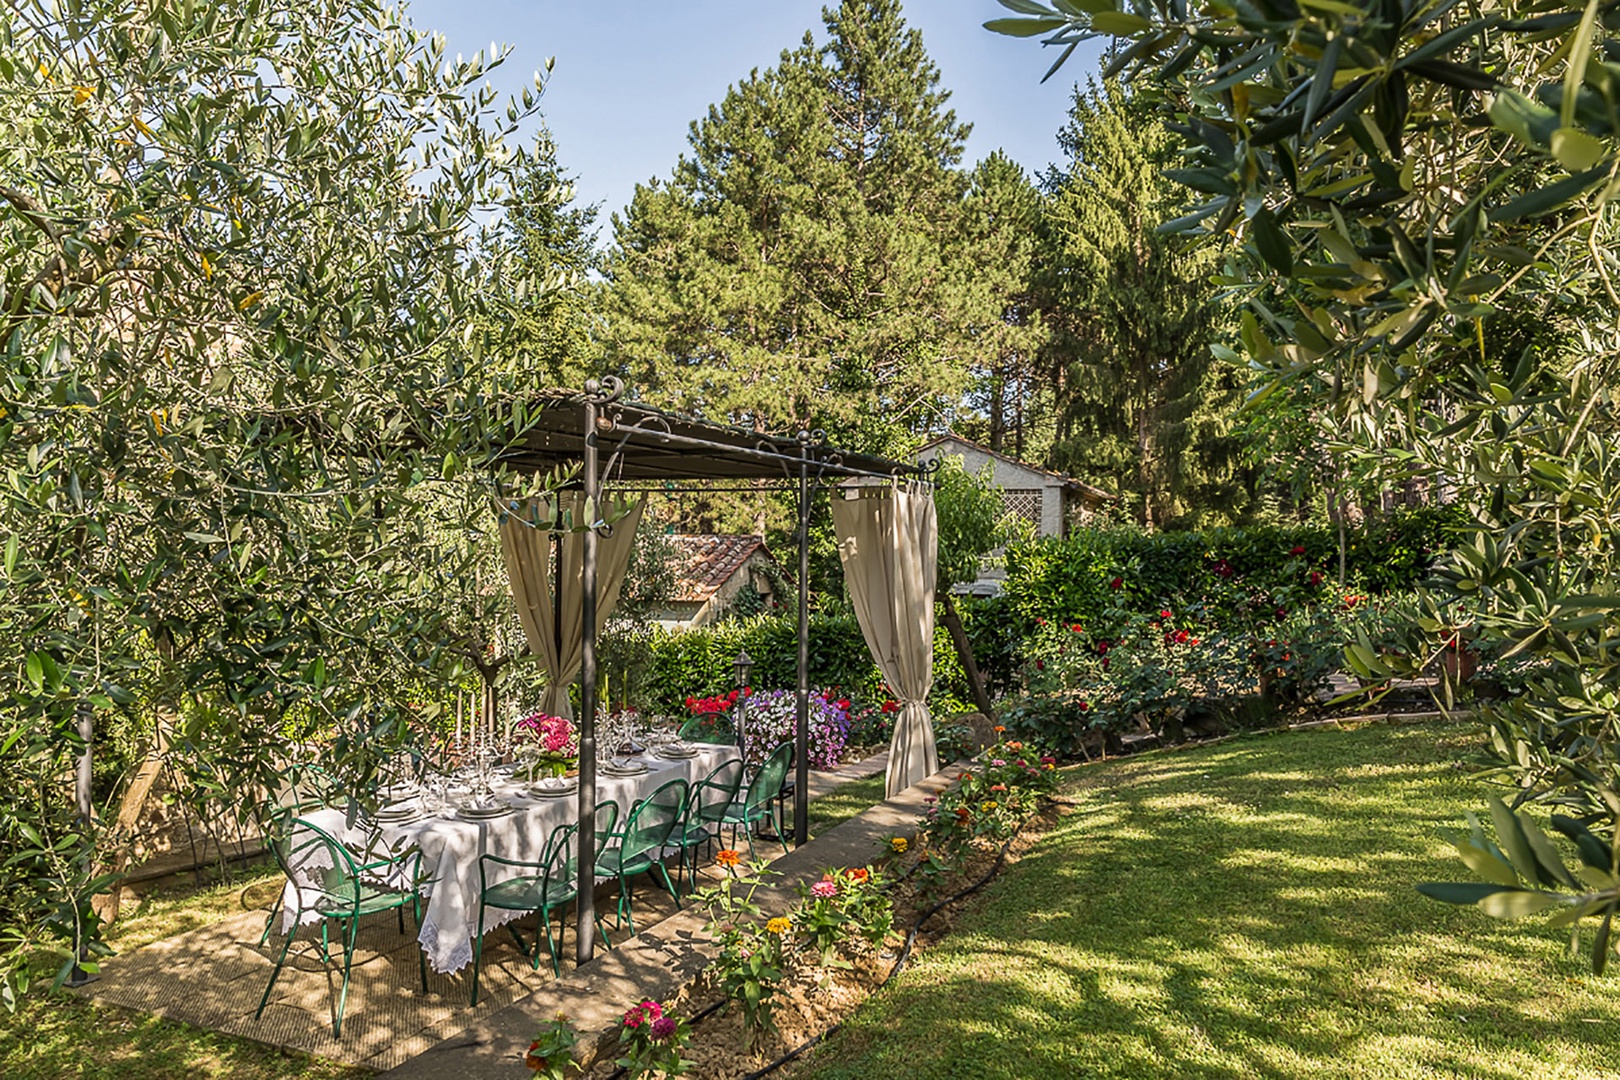 The dreamy pergola for dining or relaxing is just outside the villa.